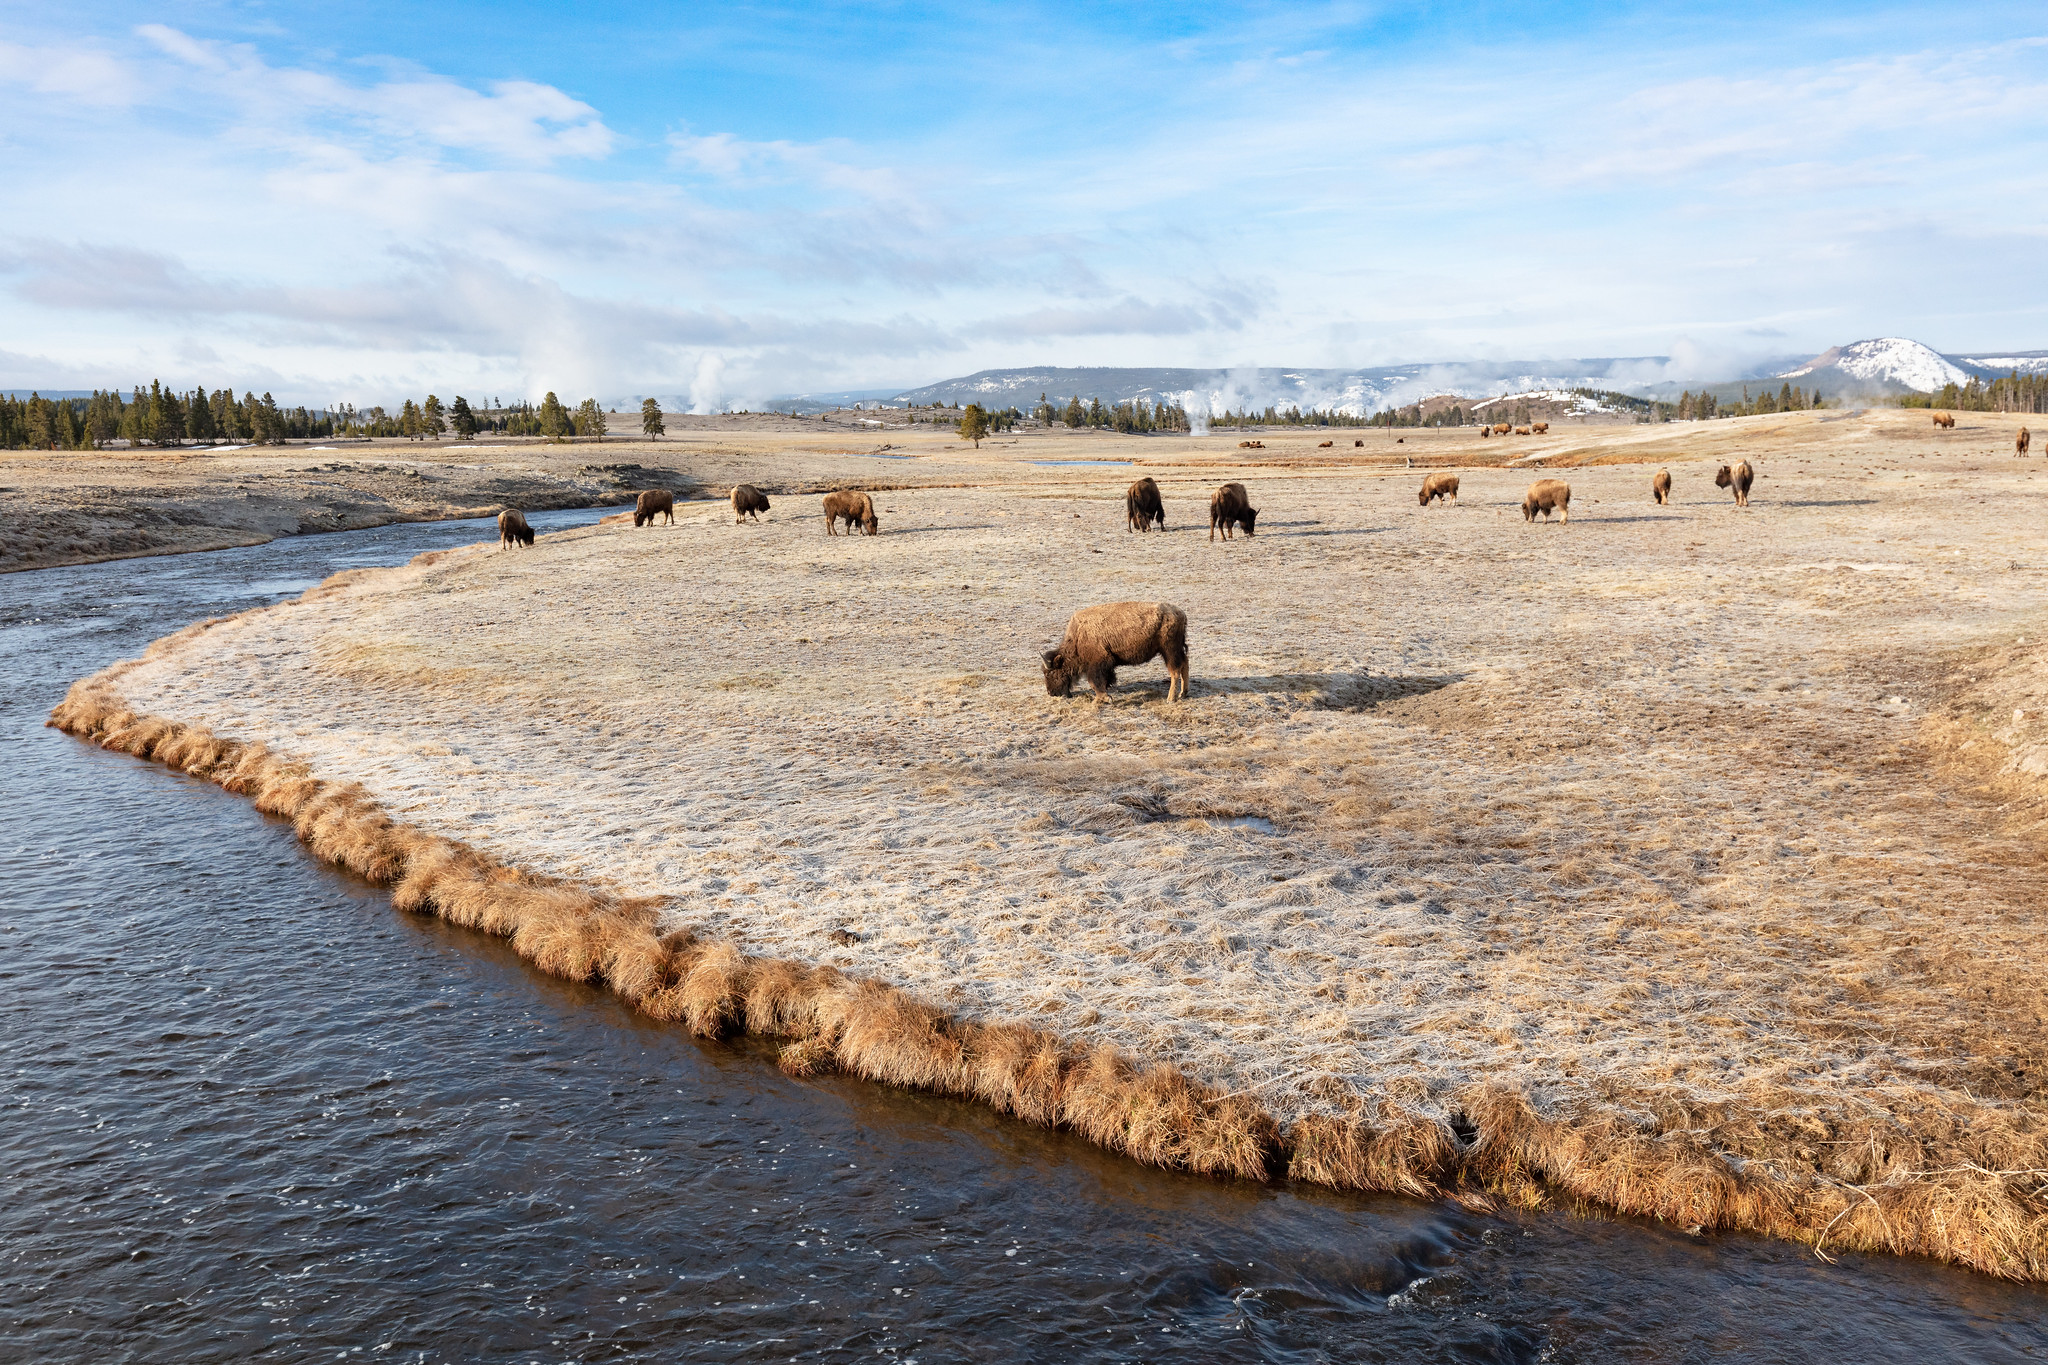 bison grazing in thermal area